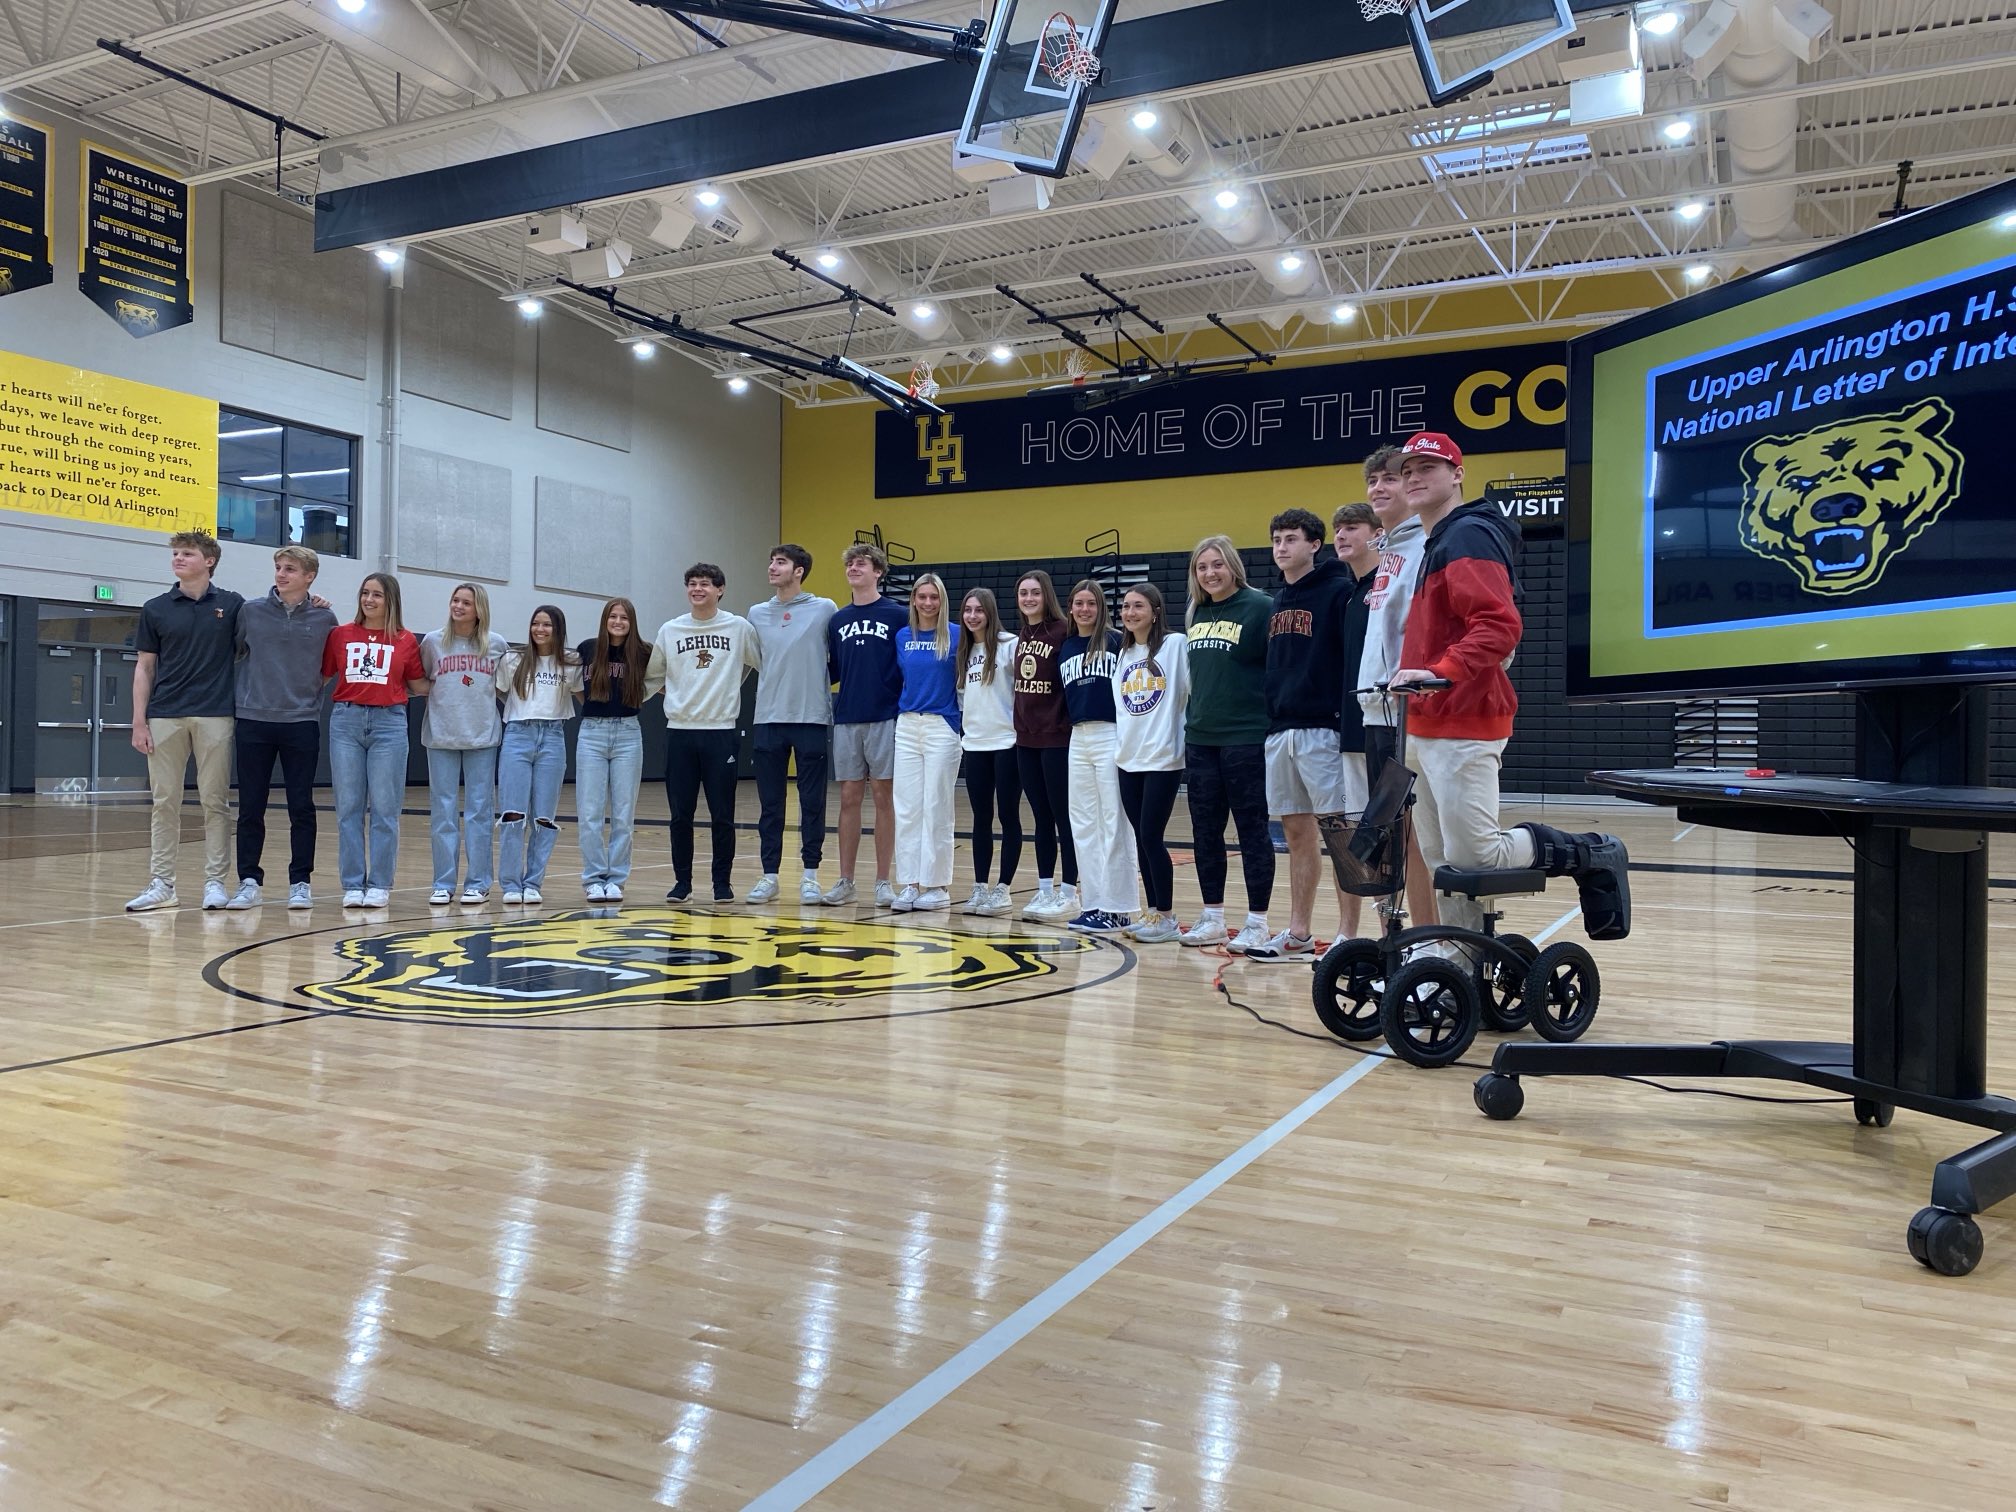 The 19 student-athletes posing arm in arm at midcourt in front of the Golden Bear logo in the Upper Arlington High School gymnasium